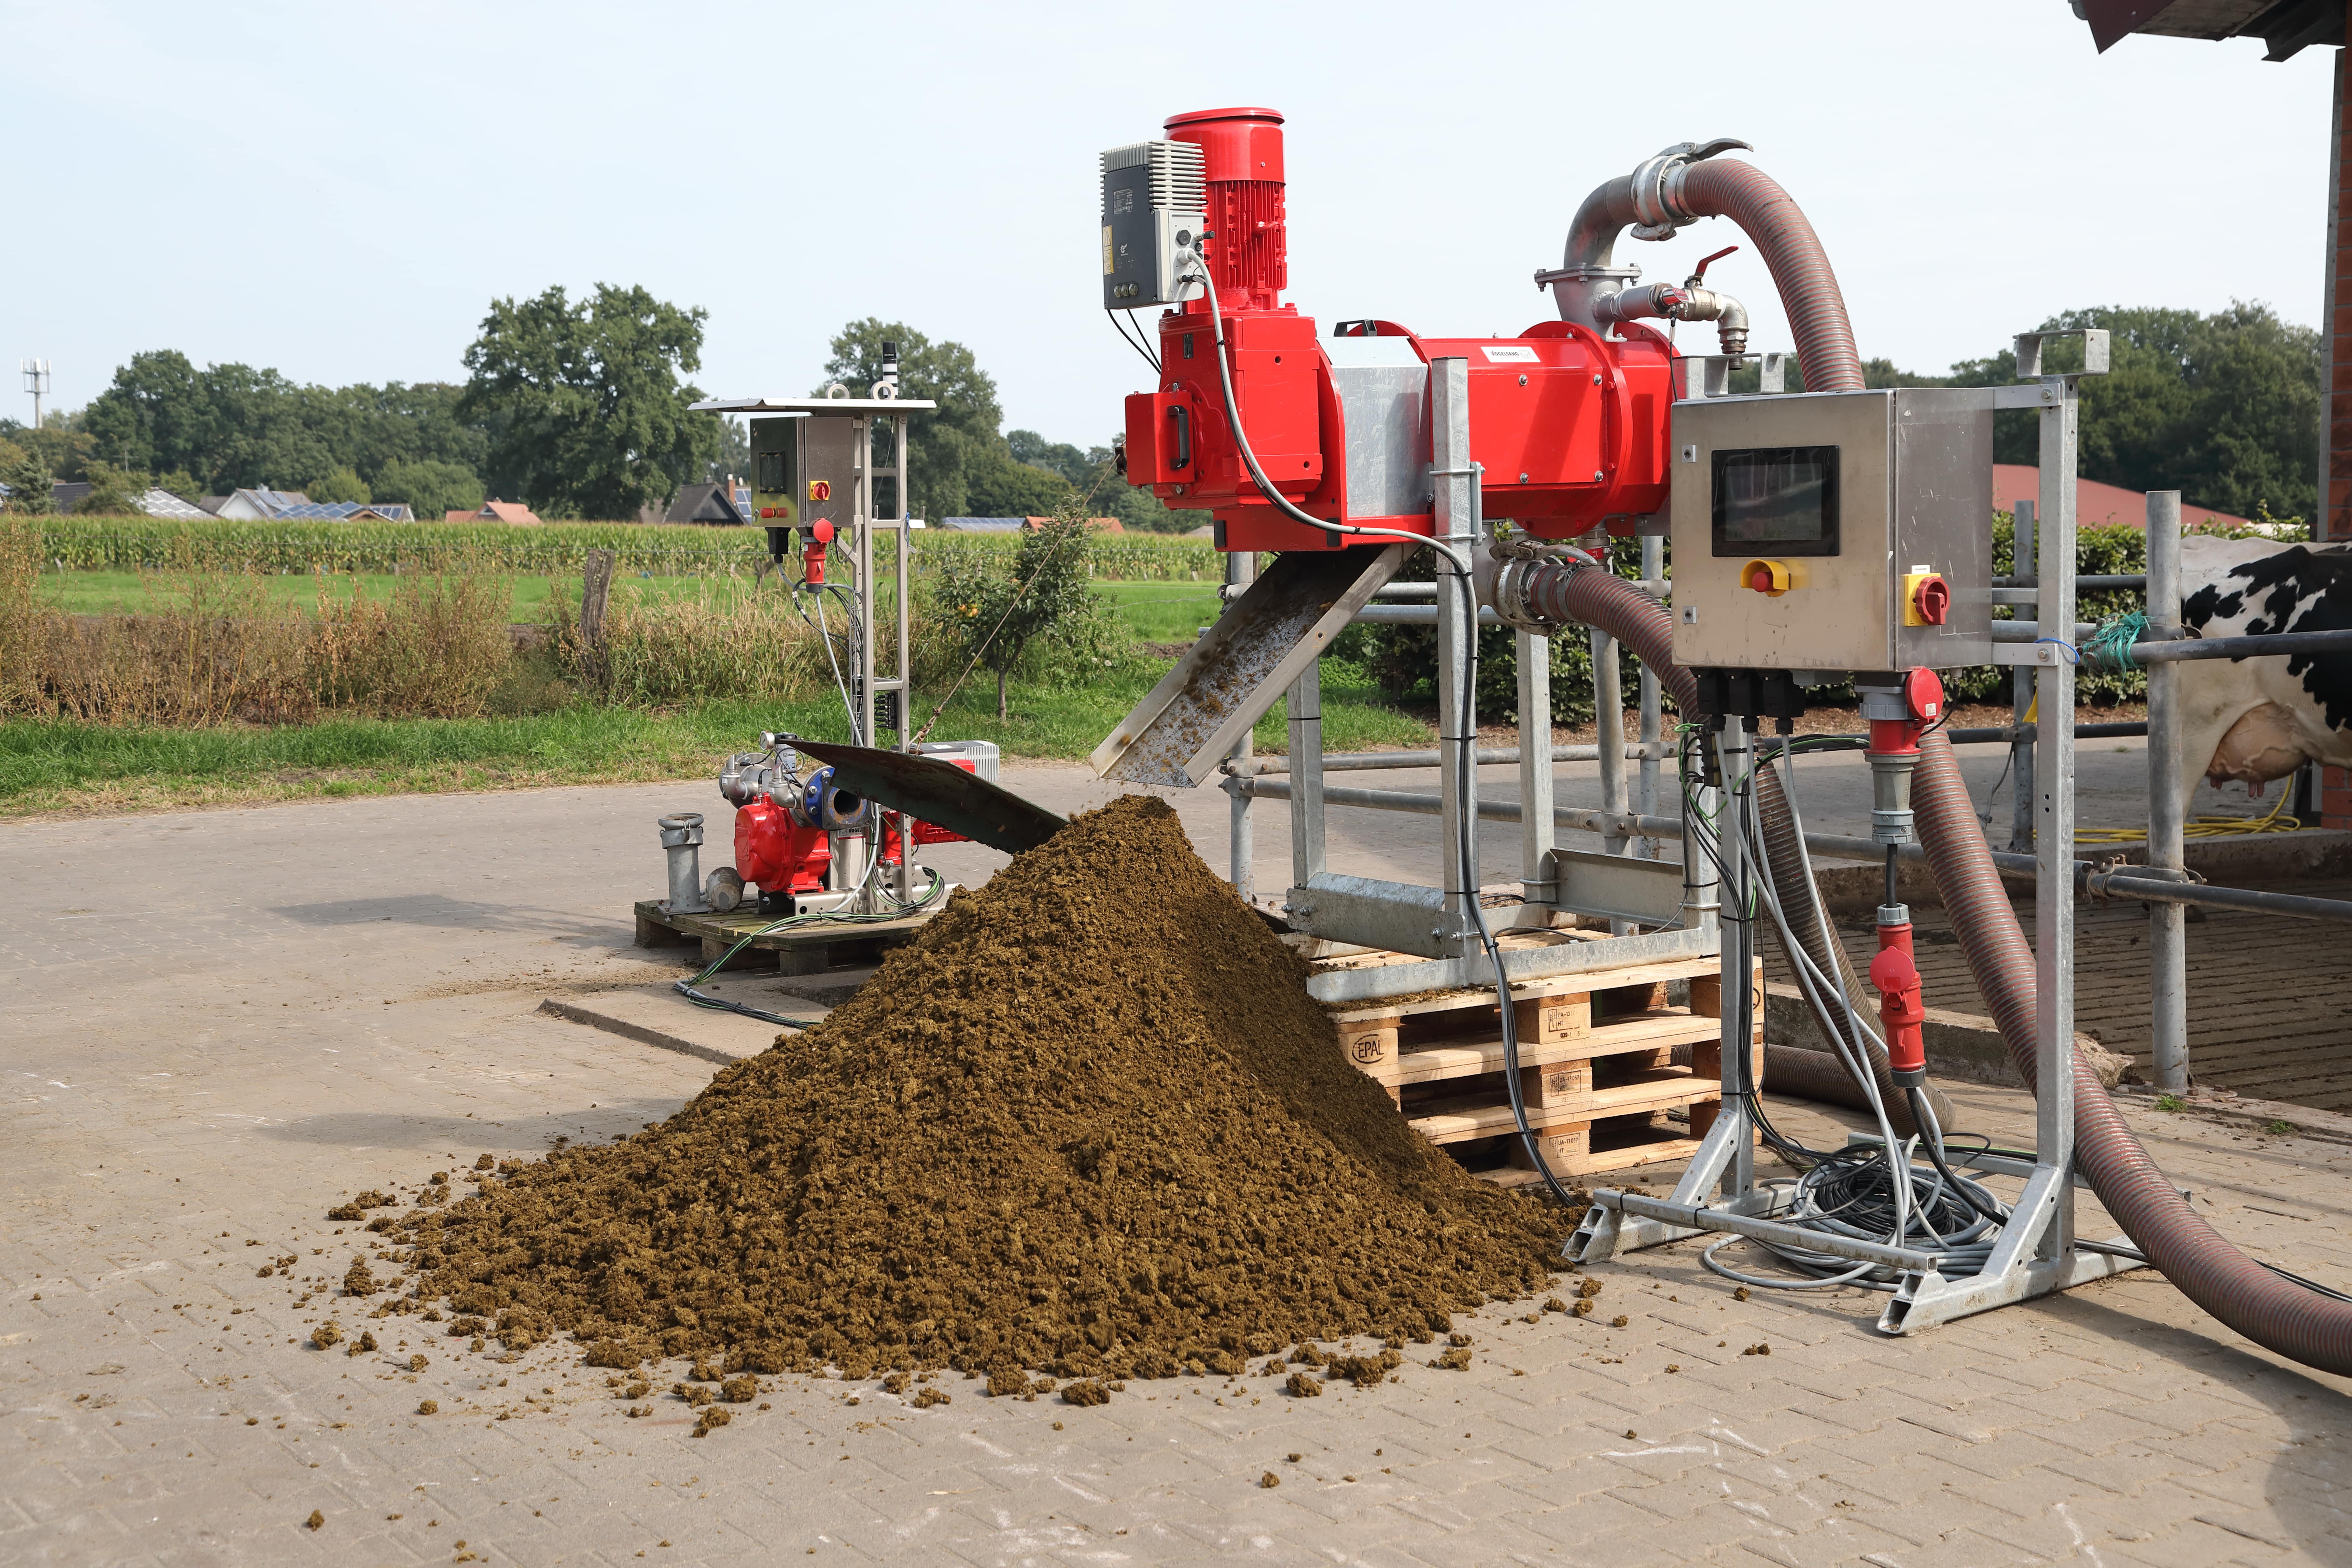 Vogelsang has taken the solid-liquid separation of liquid manure and digestate using a press screw separator and optimised the technology behind it.